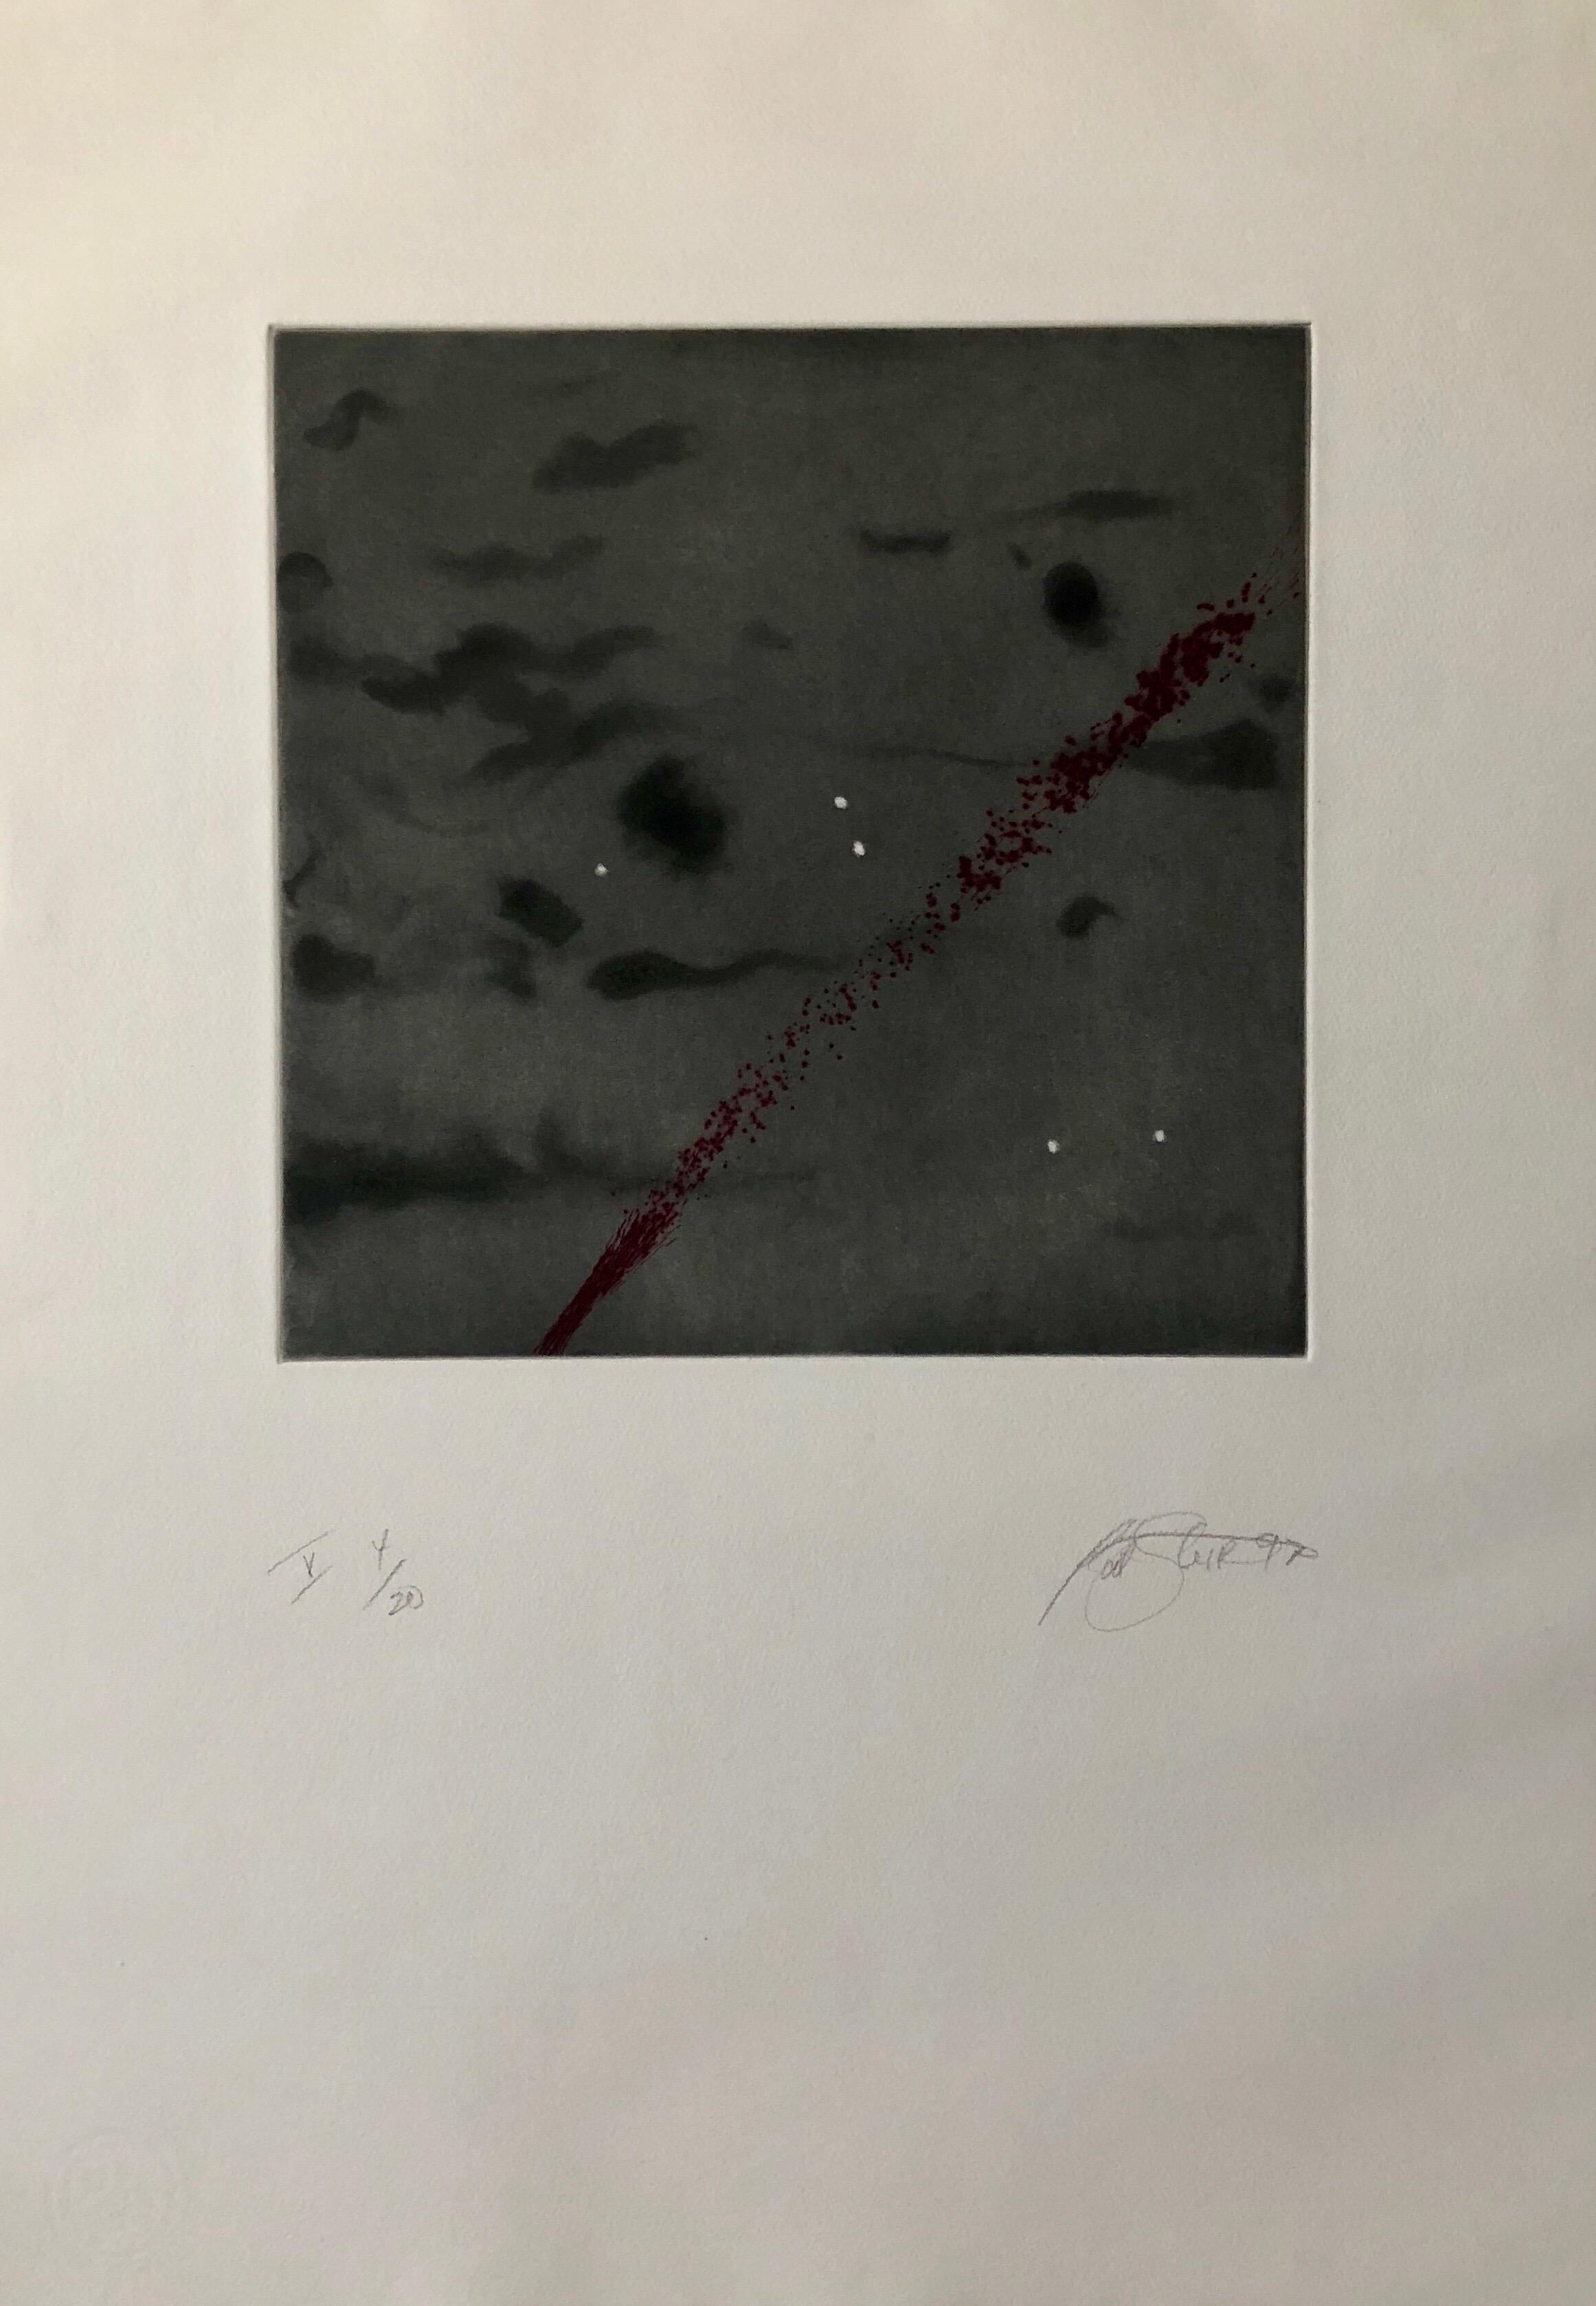 Comet, Outer Space Dark Series Aquatint Etching Color Abstract Expressionist  For Sale 2